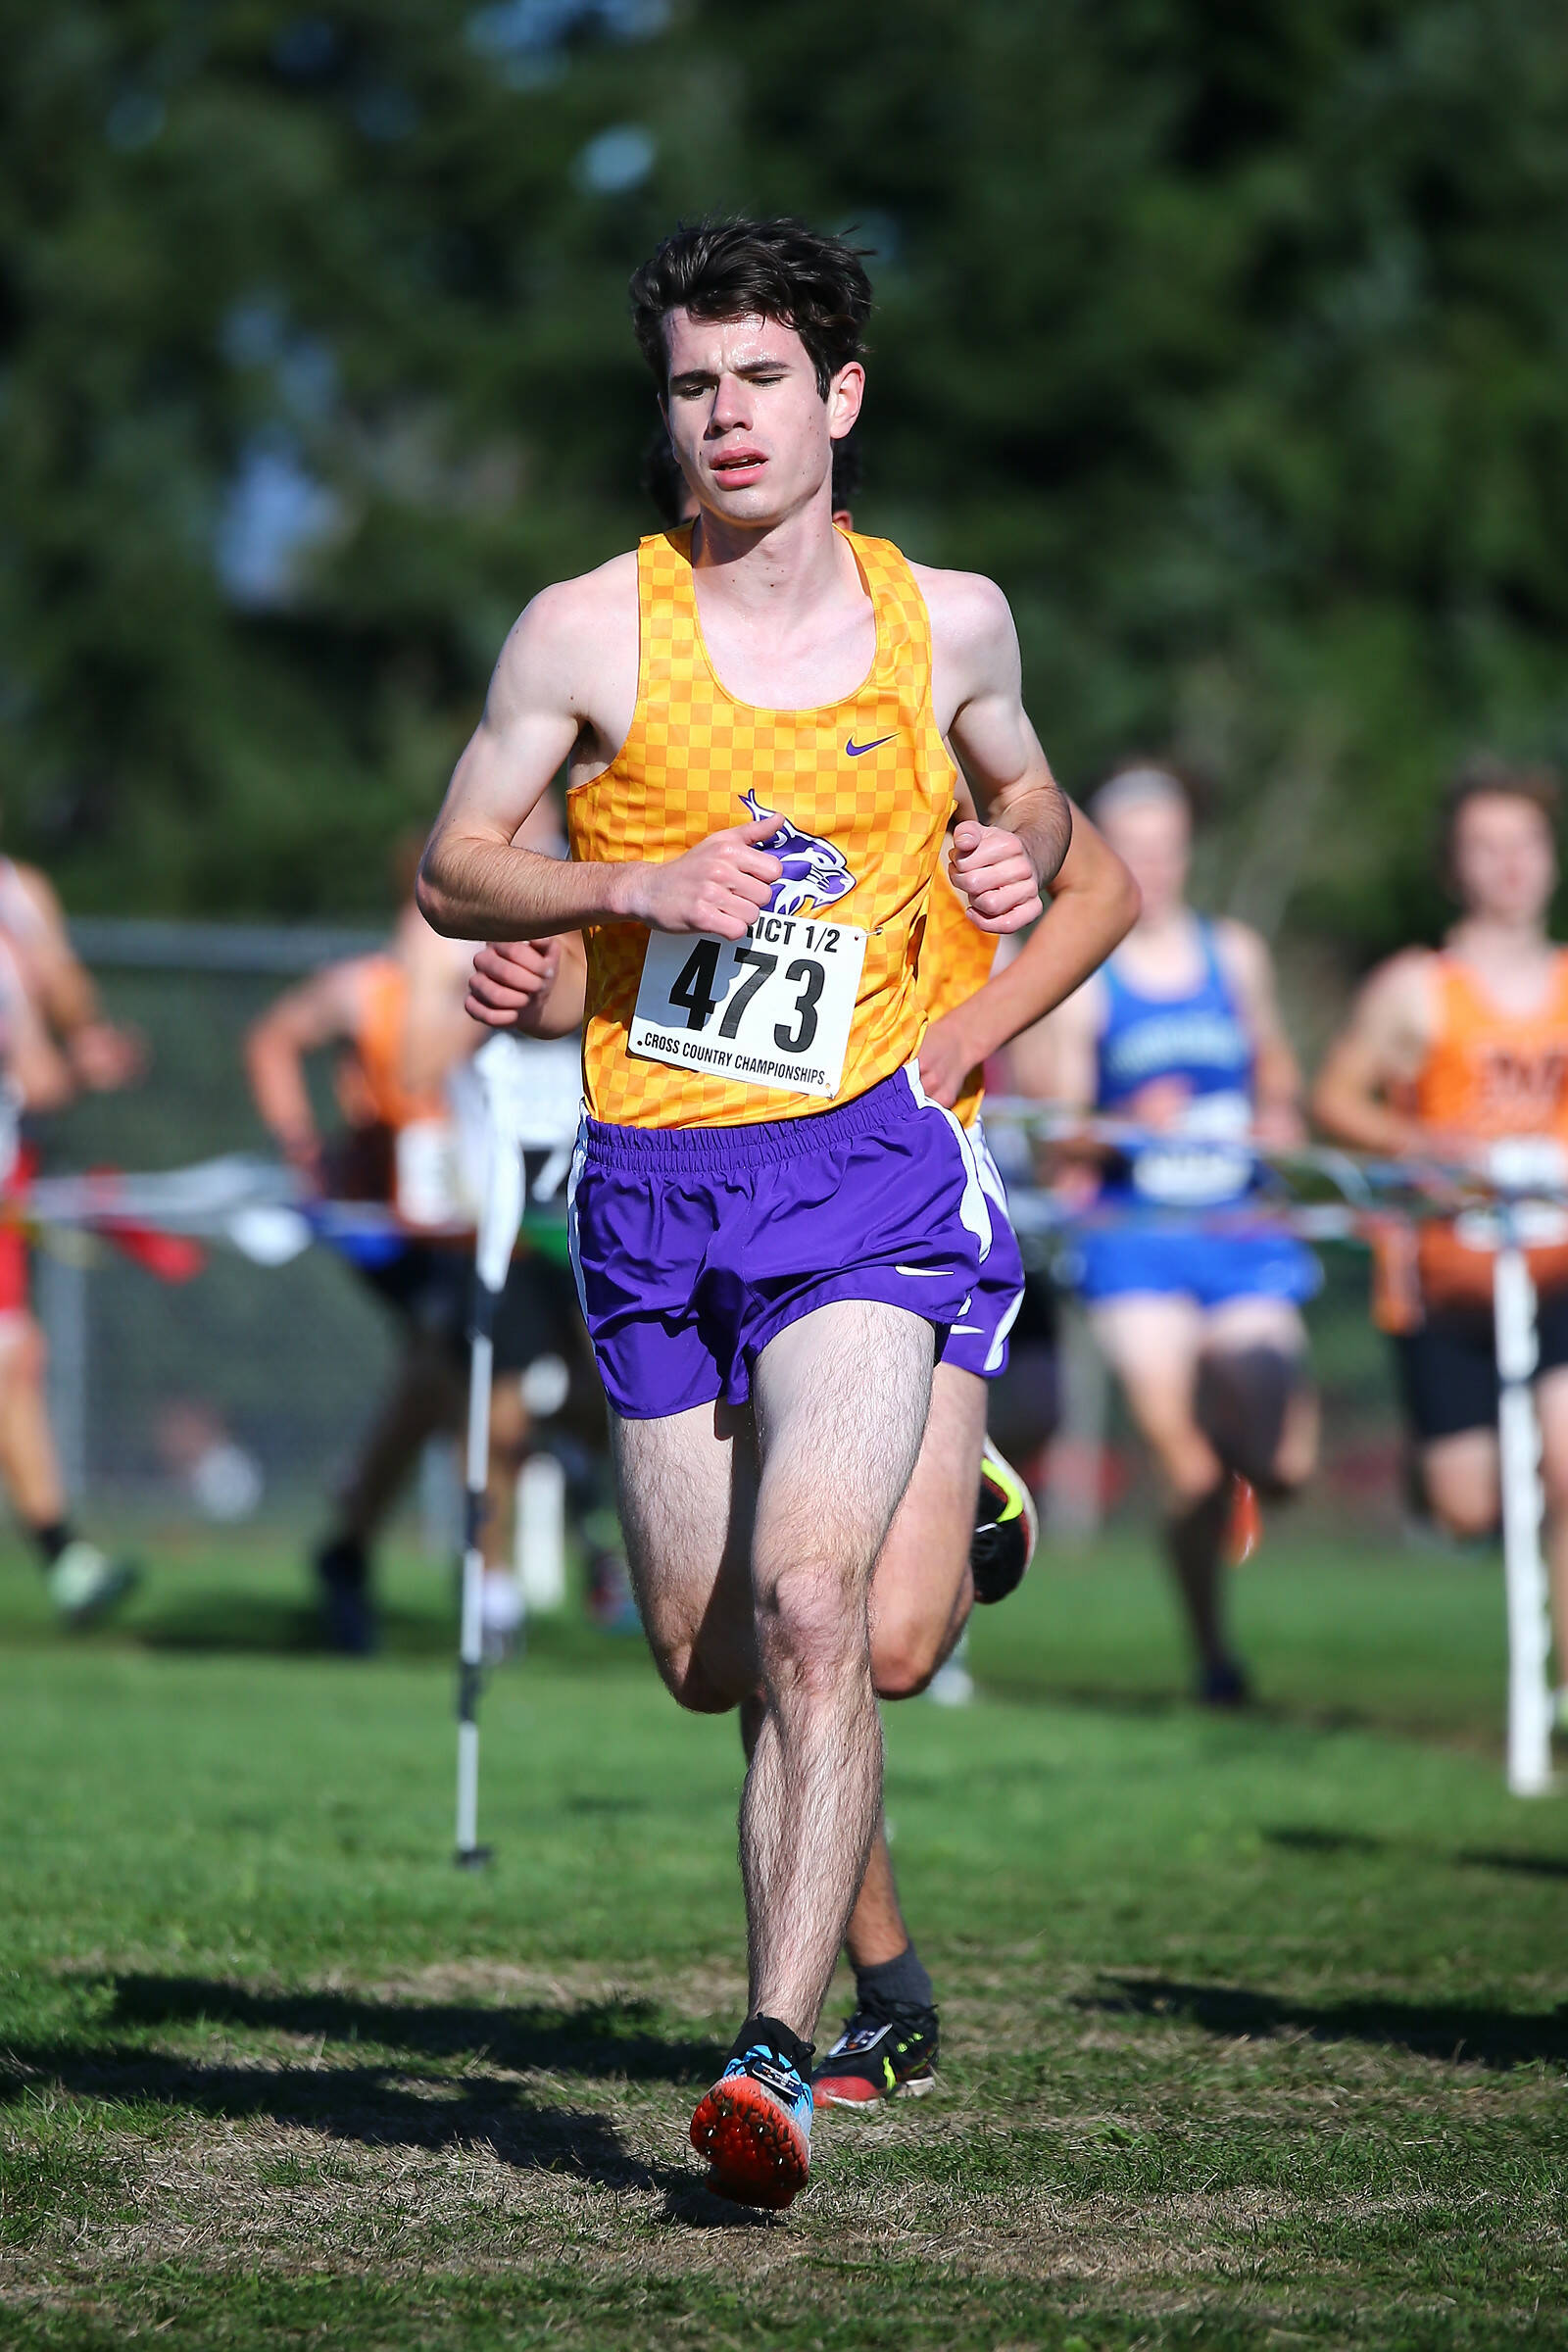 Photo by John Fisken
Senior Cooper Billiter secured a 7th place finish at the district cross country meet Saturday.